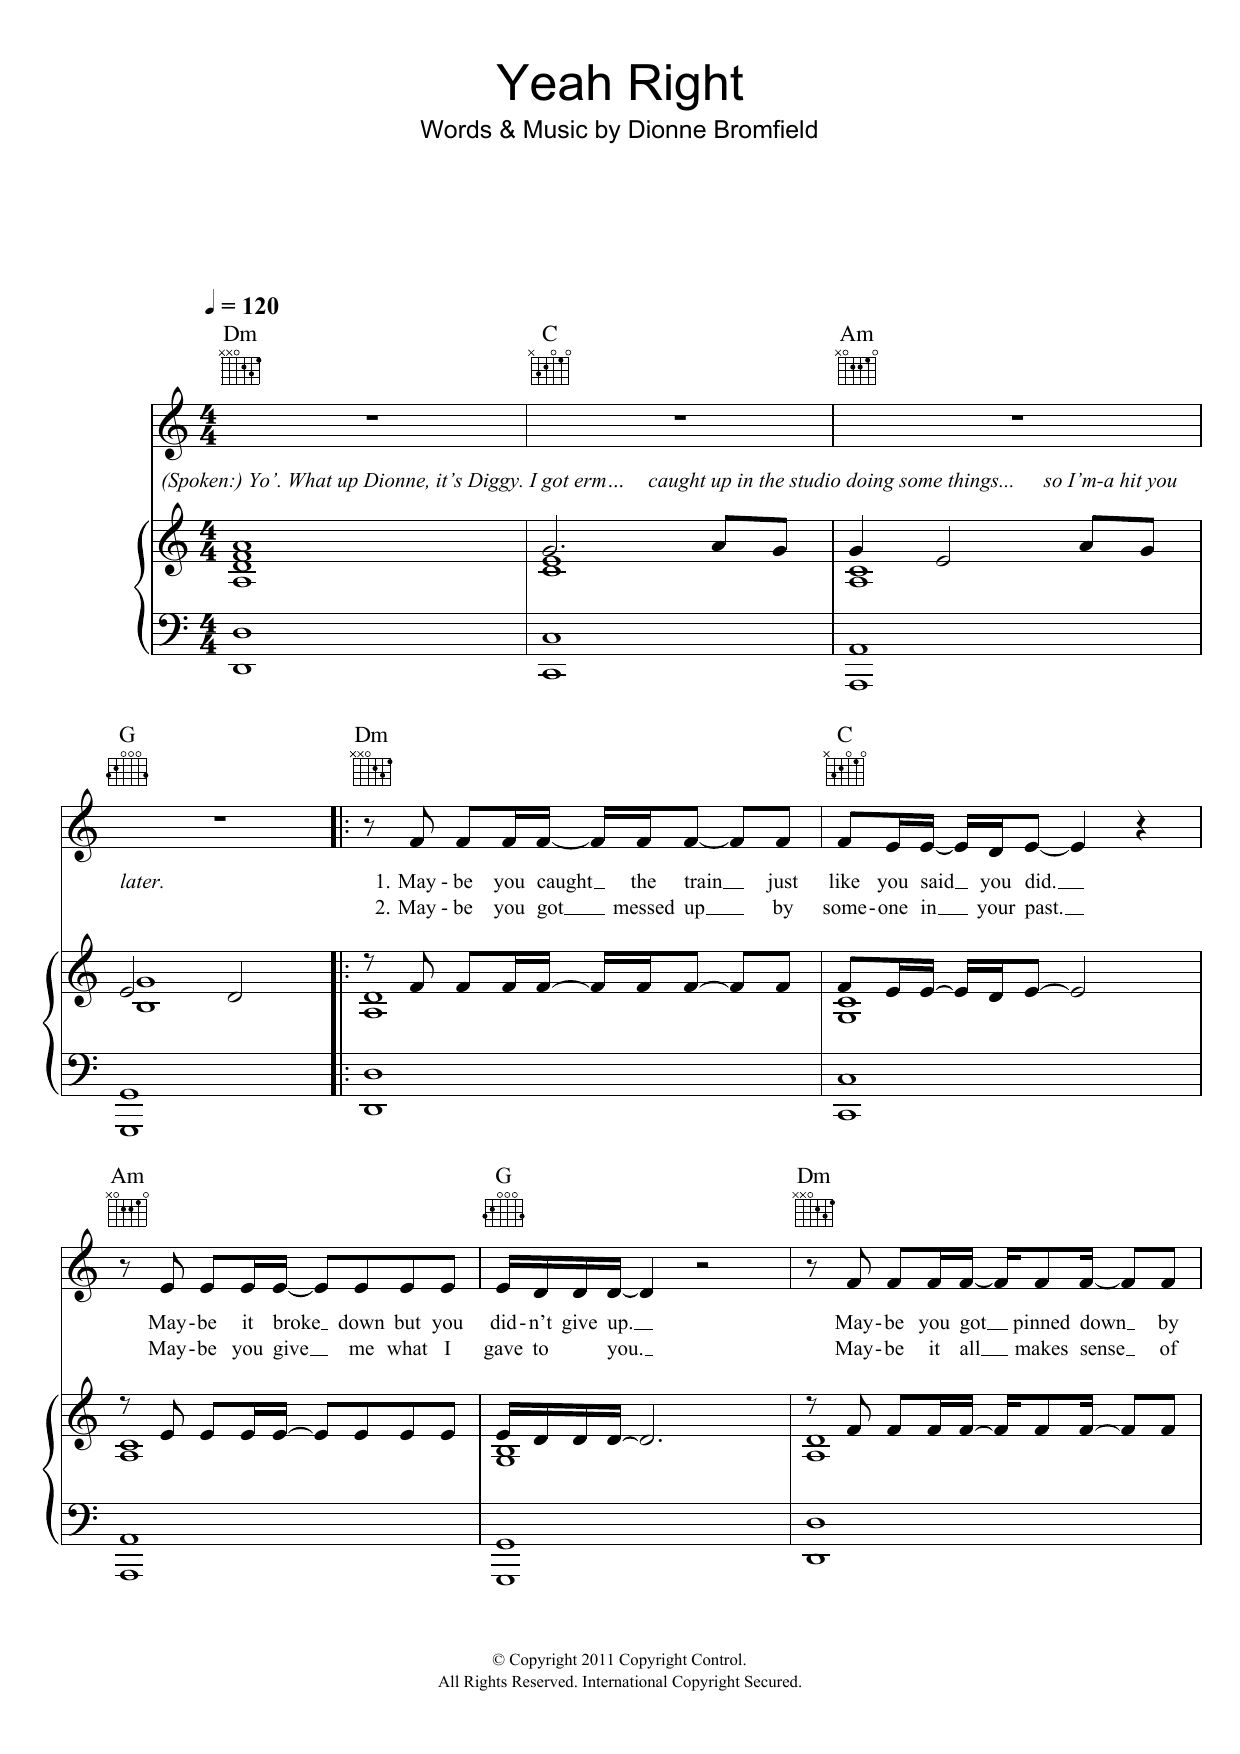 Download Dionne Bromfield Yeah Right Sheet Music